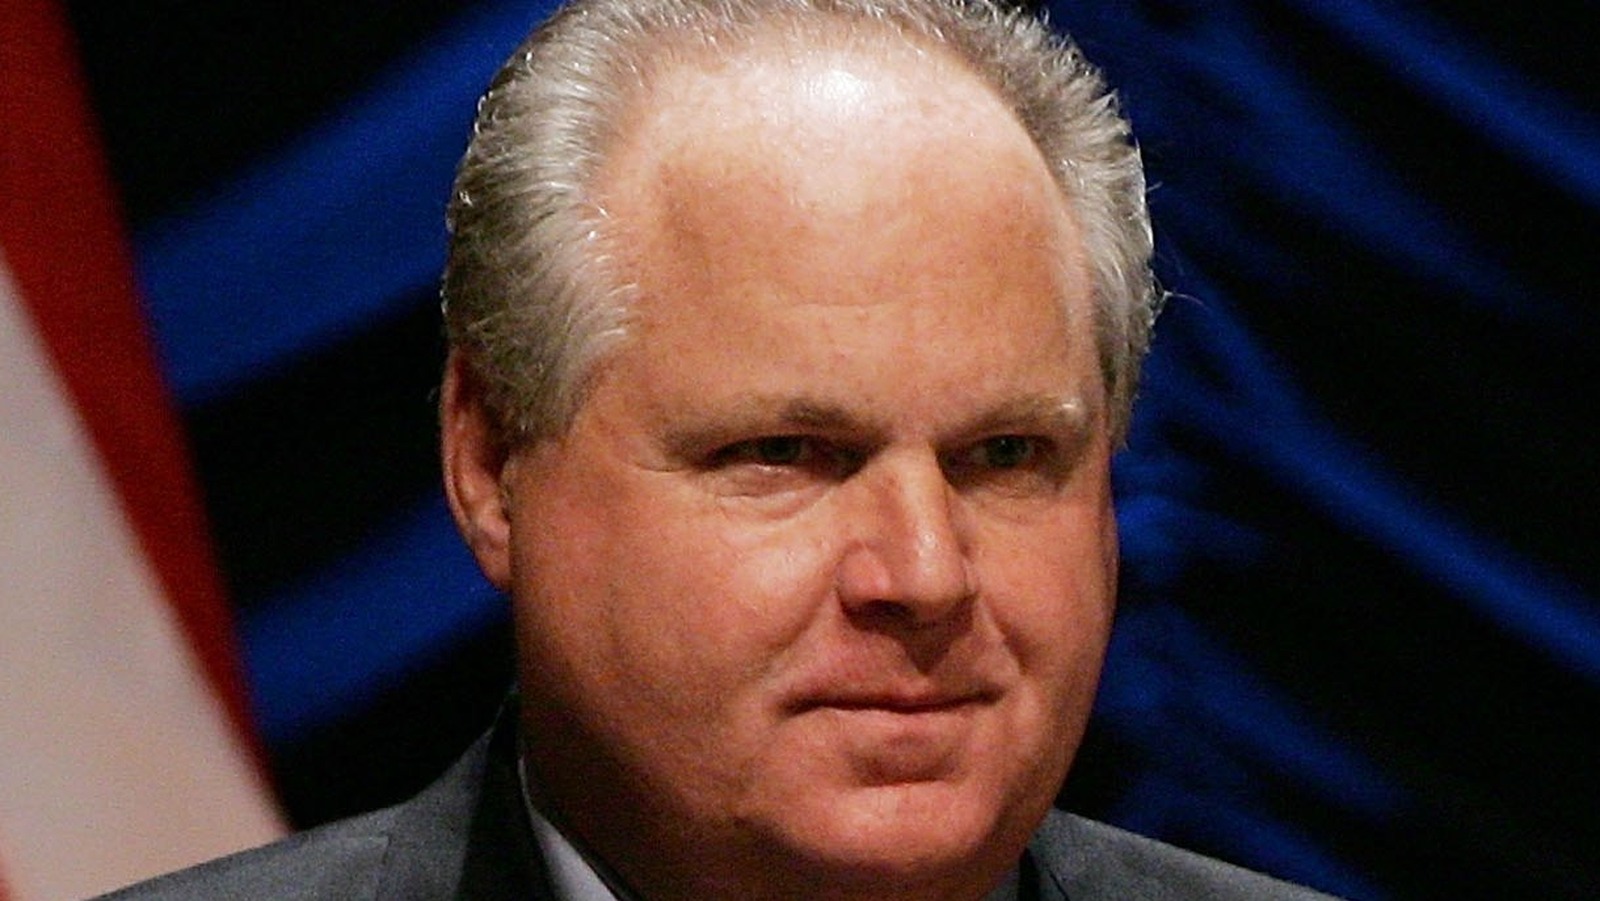 rush limbaugh on crypto currency